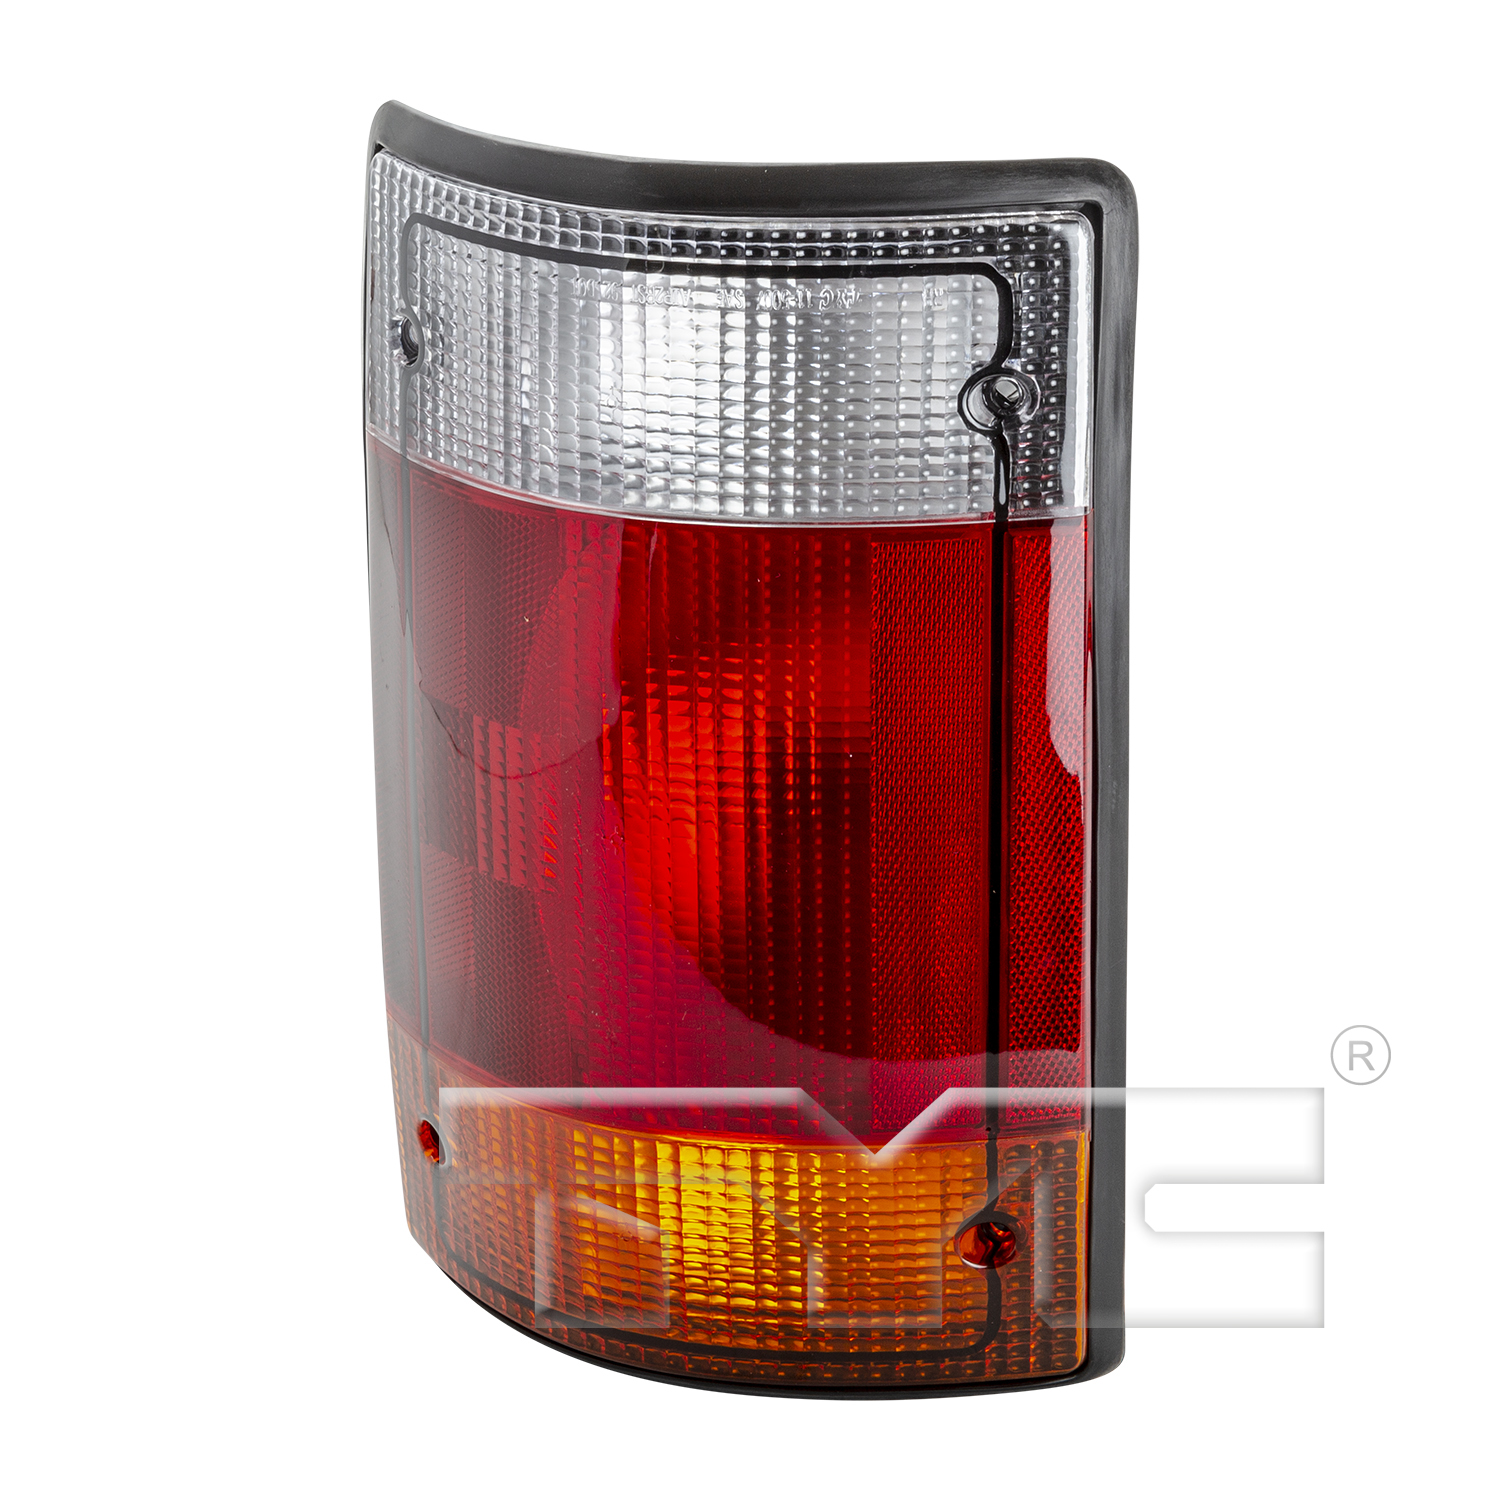 Aftermarket TAILLIGHTS for FORD - E-250 ECONOLINE, E-250 ECONOLINE,92-94,RT Taillamp assy